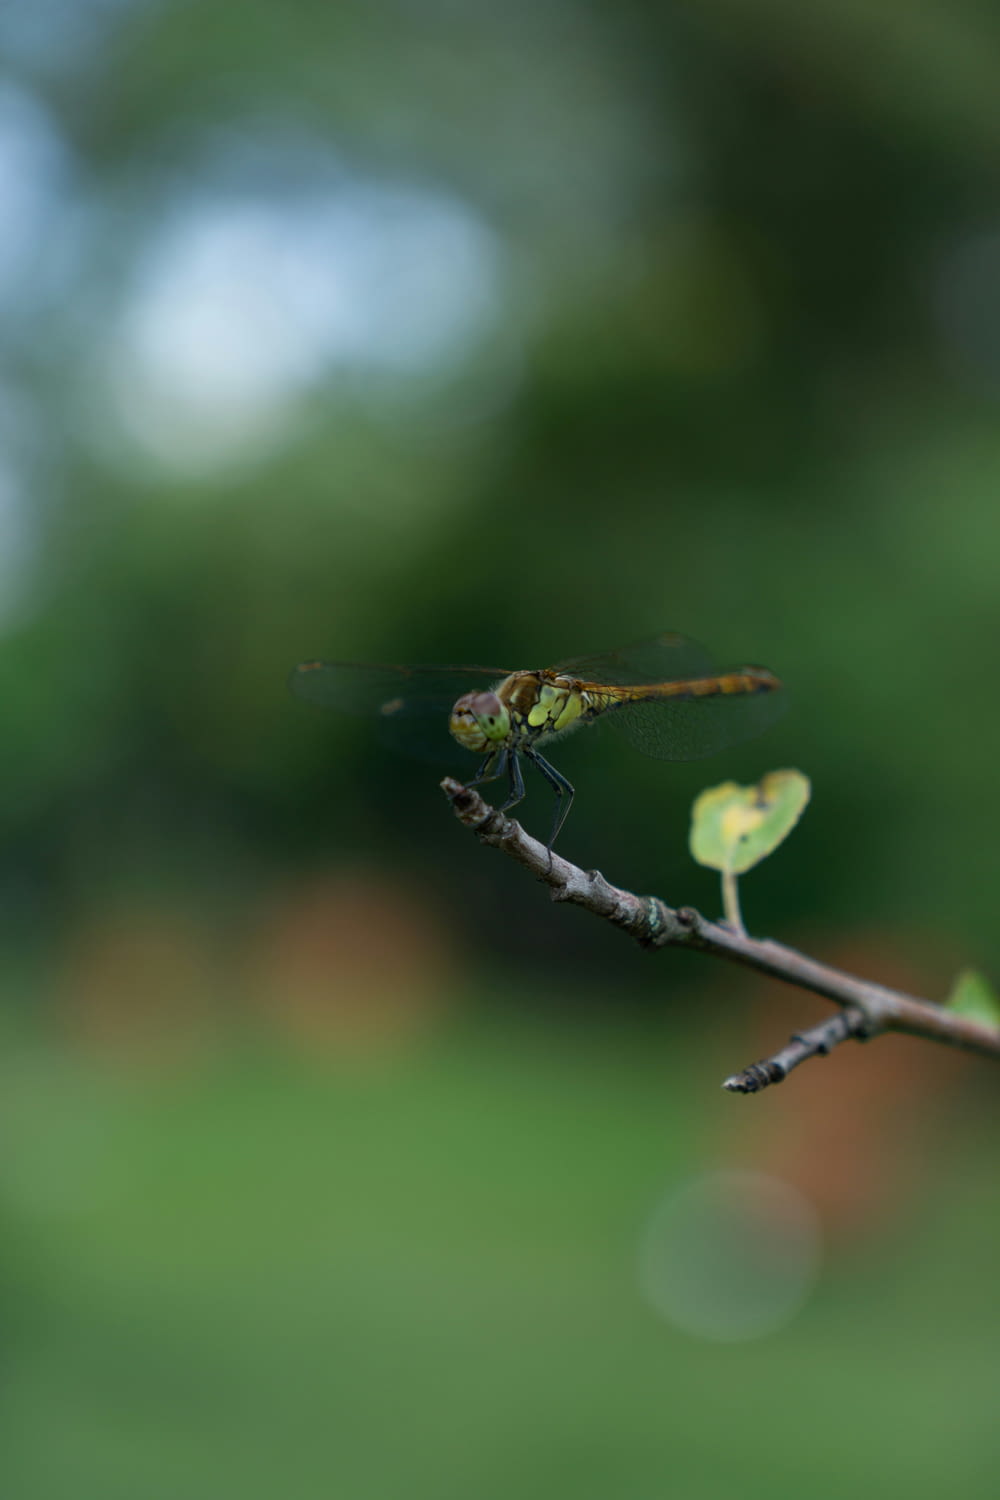 a dragonfly sitting on top of a tree branch